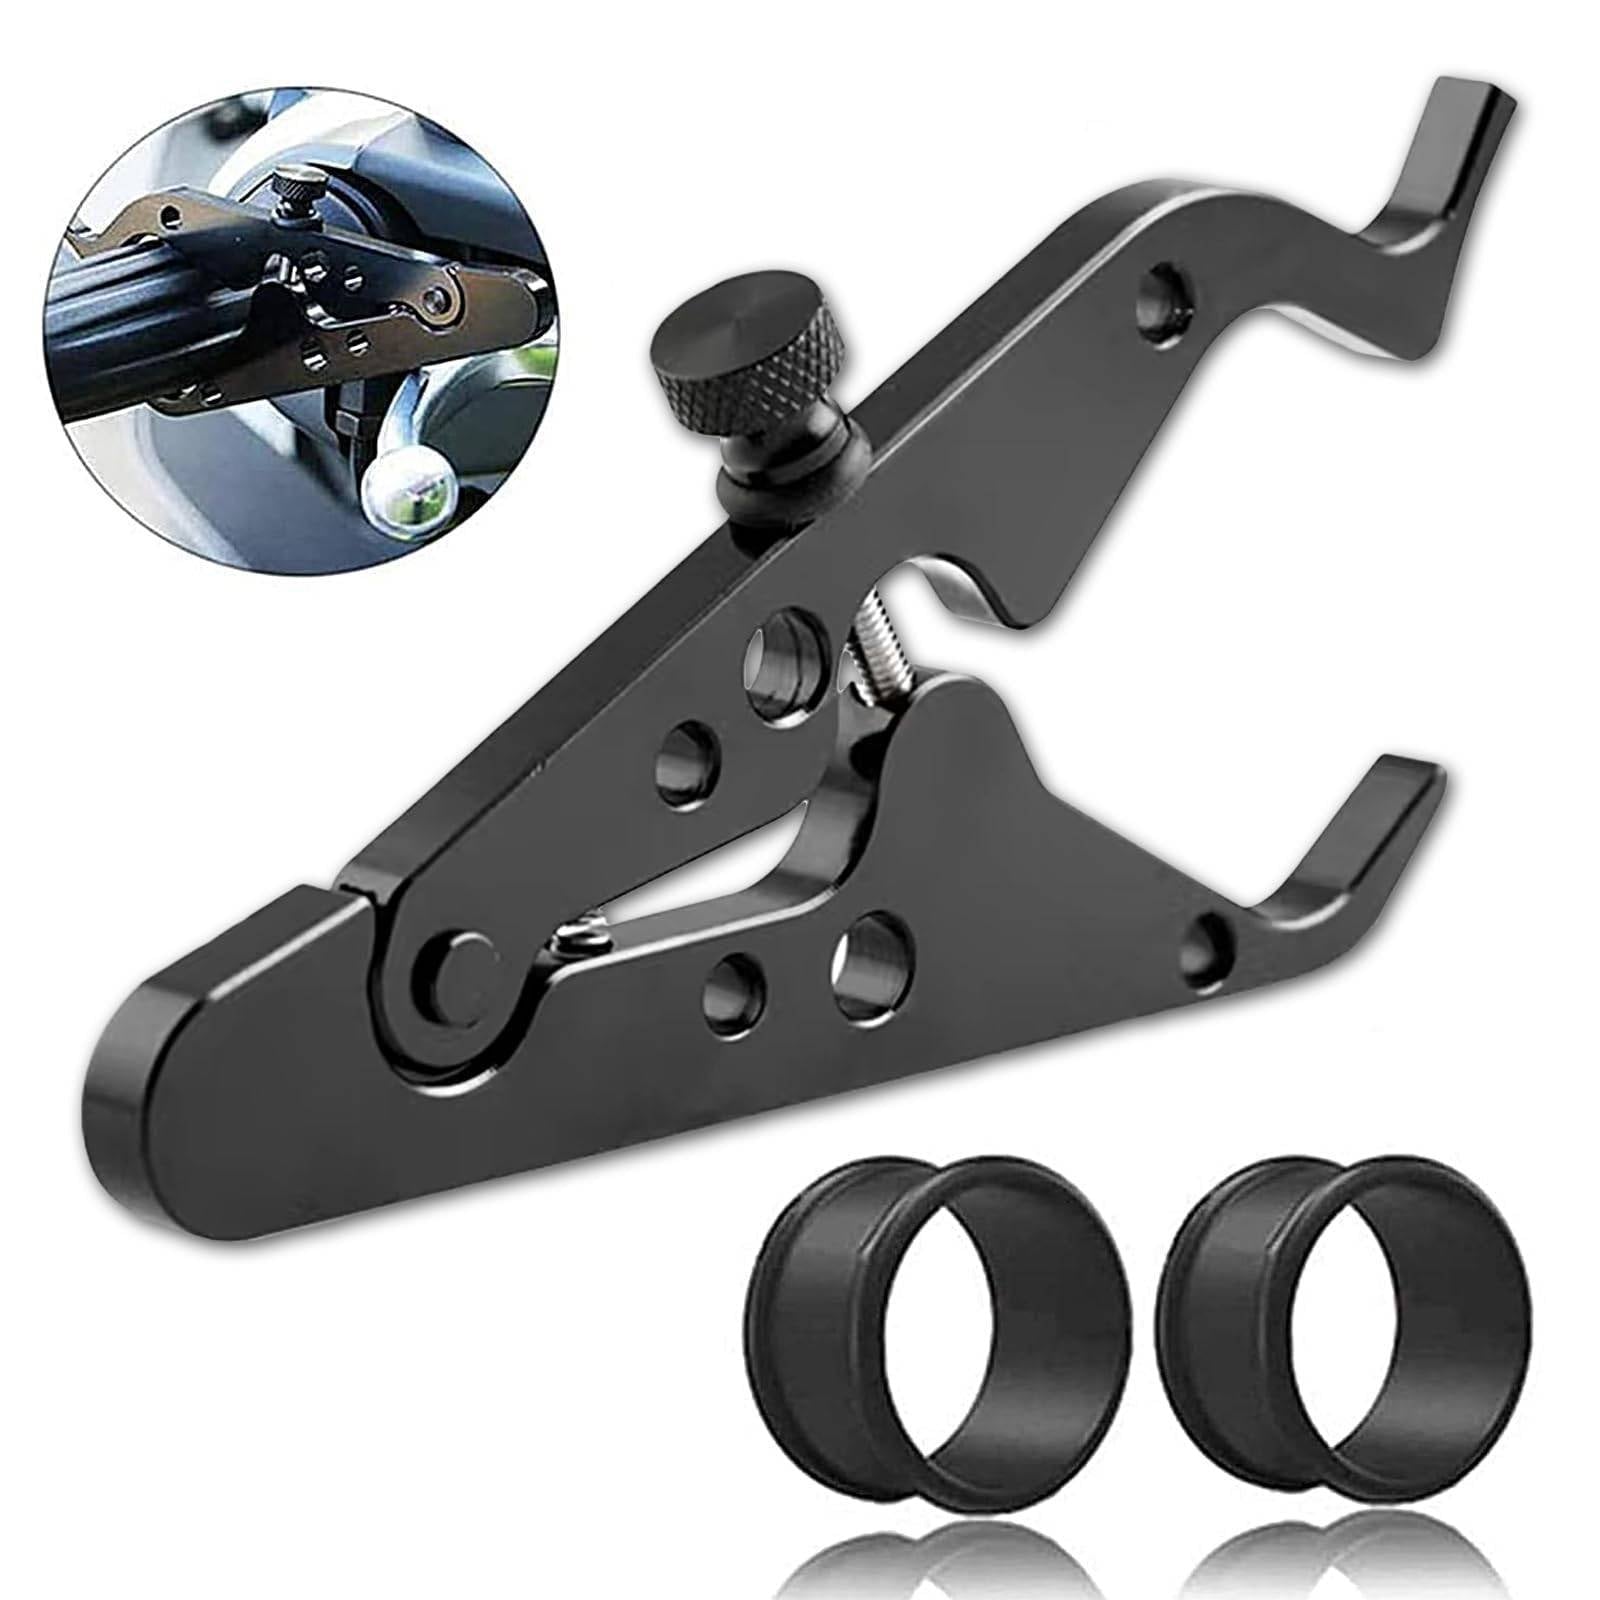 2Pack Motorcycle Cruise Control, Motorcycle Throttle Lock, Universal Throttle Assist Wrist/Hand Grip Lock Clamp